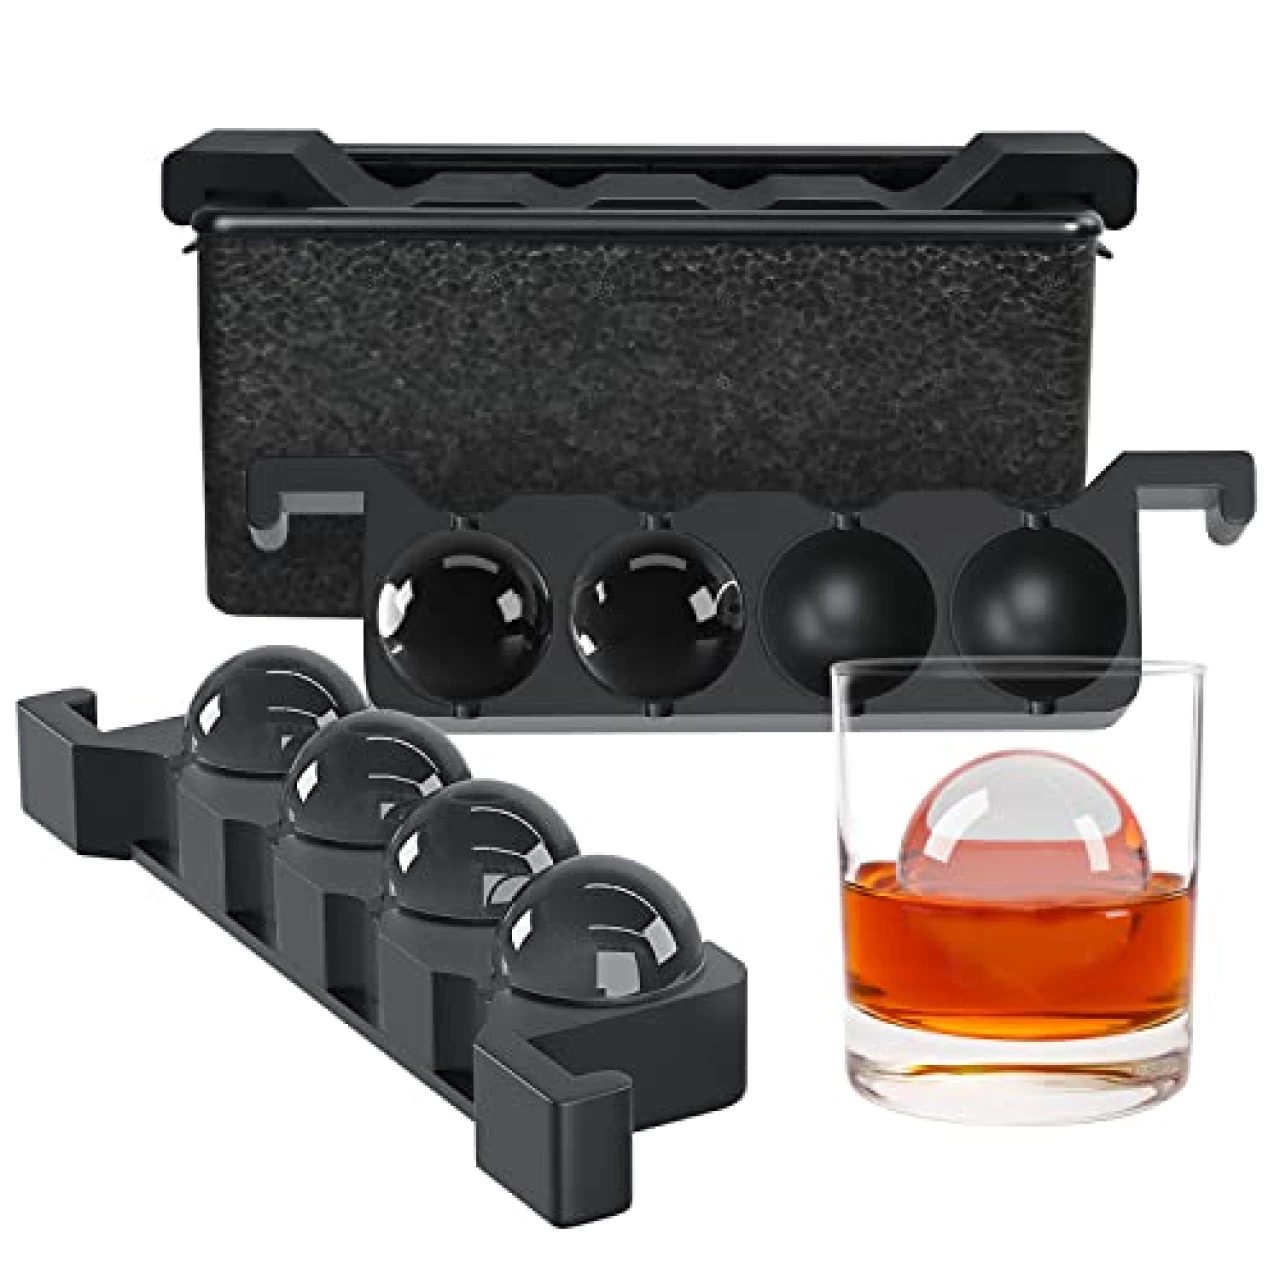 TINANA Ice Sphere Cube Maker, 2 Inch Crystal Clear prepare 8 Large Round Balls, for Cocktail, Whiskey &amp; Bourbon Drinks, Gifts for Men